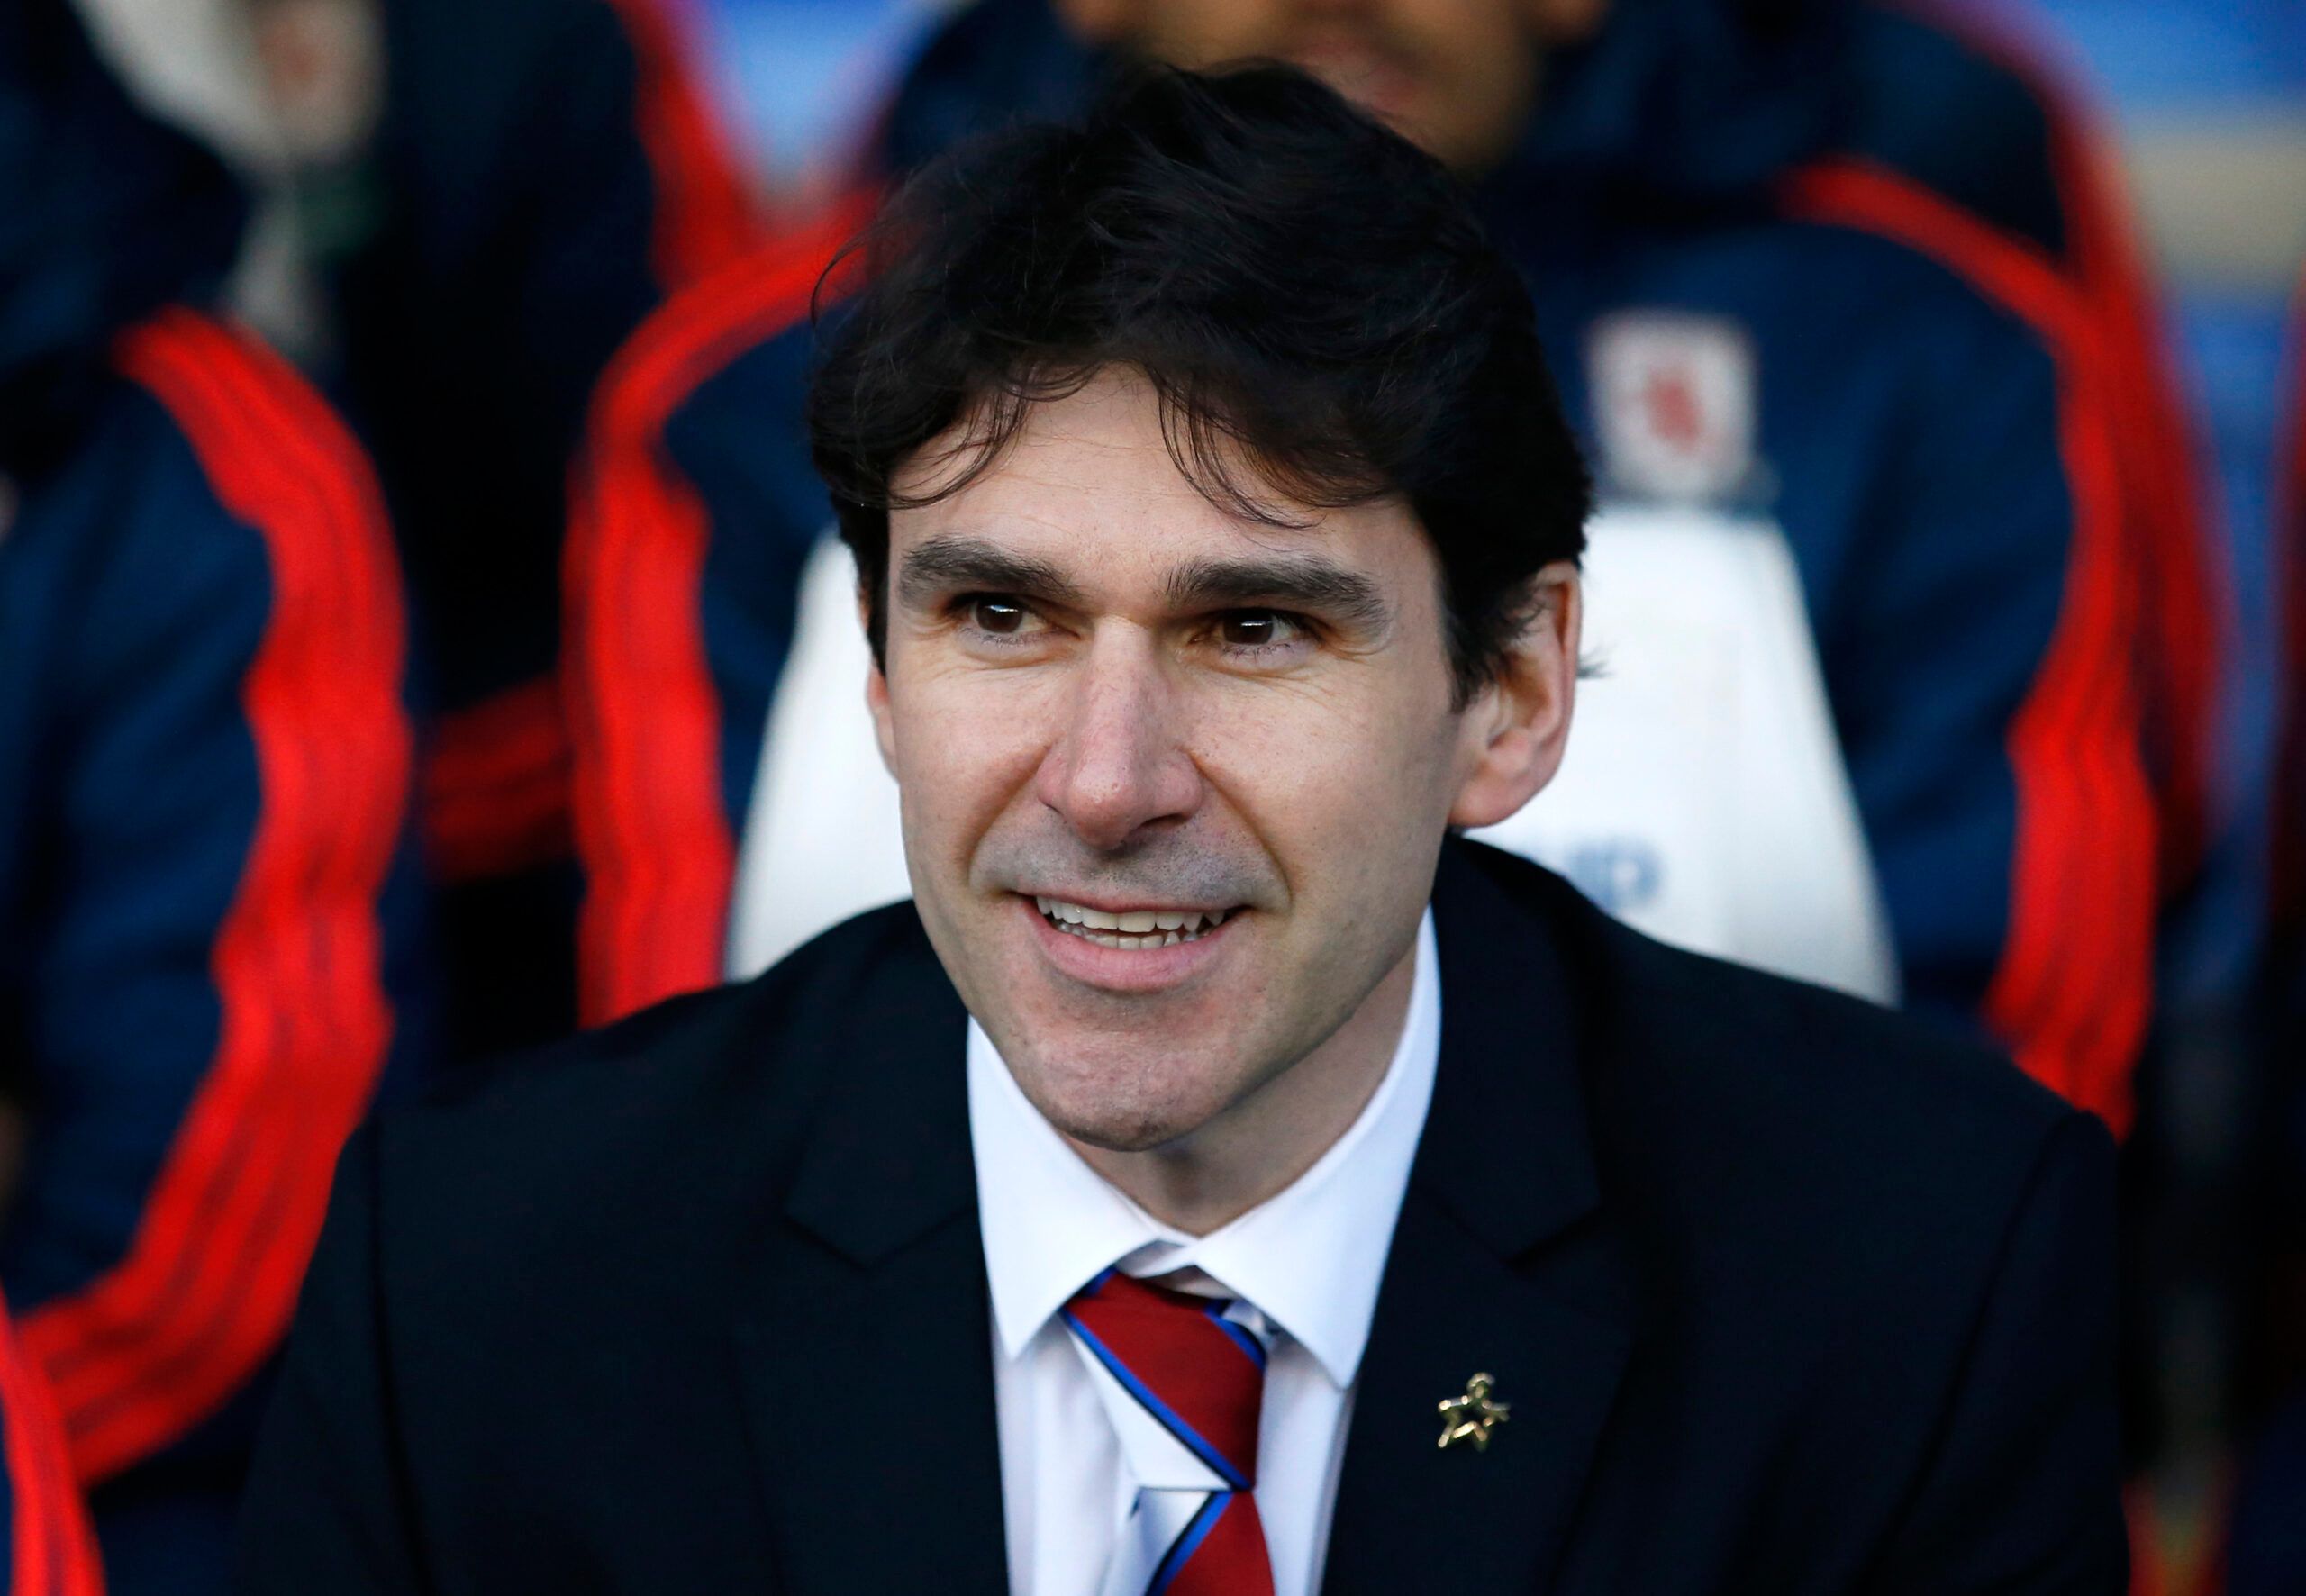 Britain Football Soccer - Birmingham City v Middlesbrough - Sky Bet Football League Championship - St Andrews - 29/4/16 
Middlesbrough manager Aitor Karanka 
Mandatory Credit: Action Images / Andrew Boyers 
Livepic 
EDITORIAL USE ONLY. No use with unauthorized audio, video, data, fixture lists, club/league logos or 